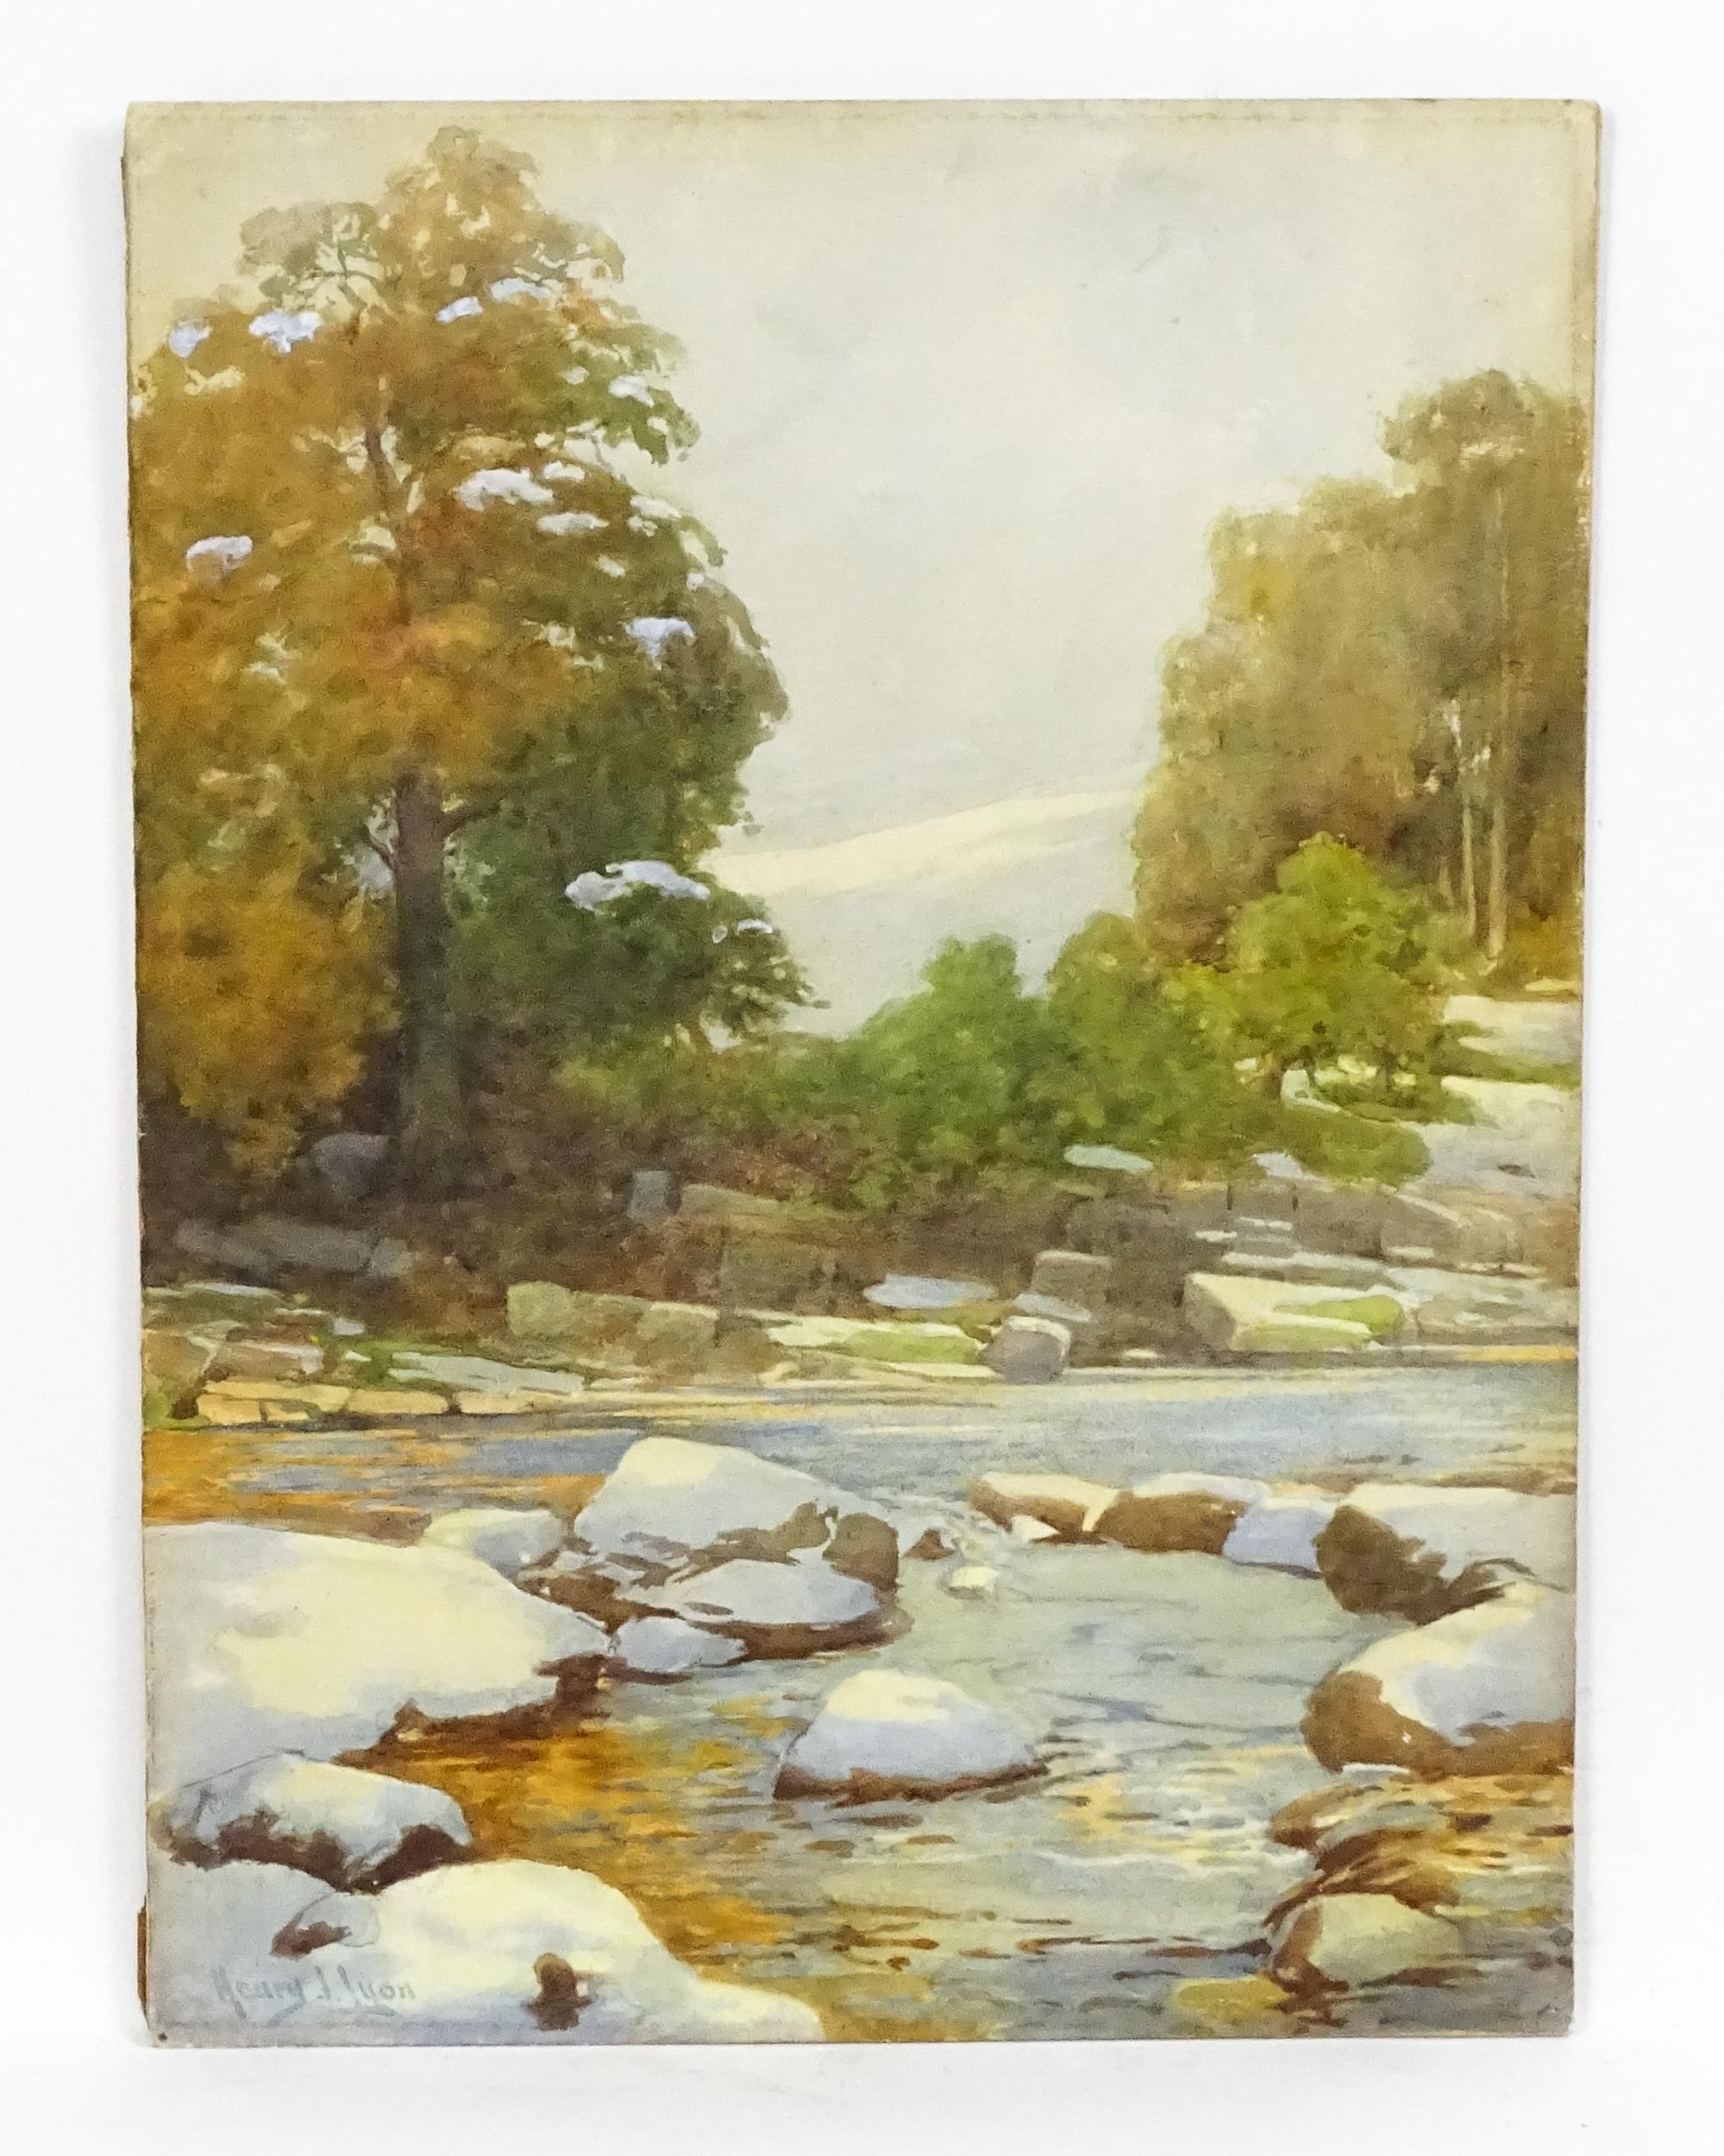 Henry John Lyon (1897-1933), Watercolour, A tranquil river landscape with boulders and trees. Signed